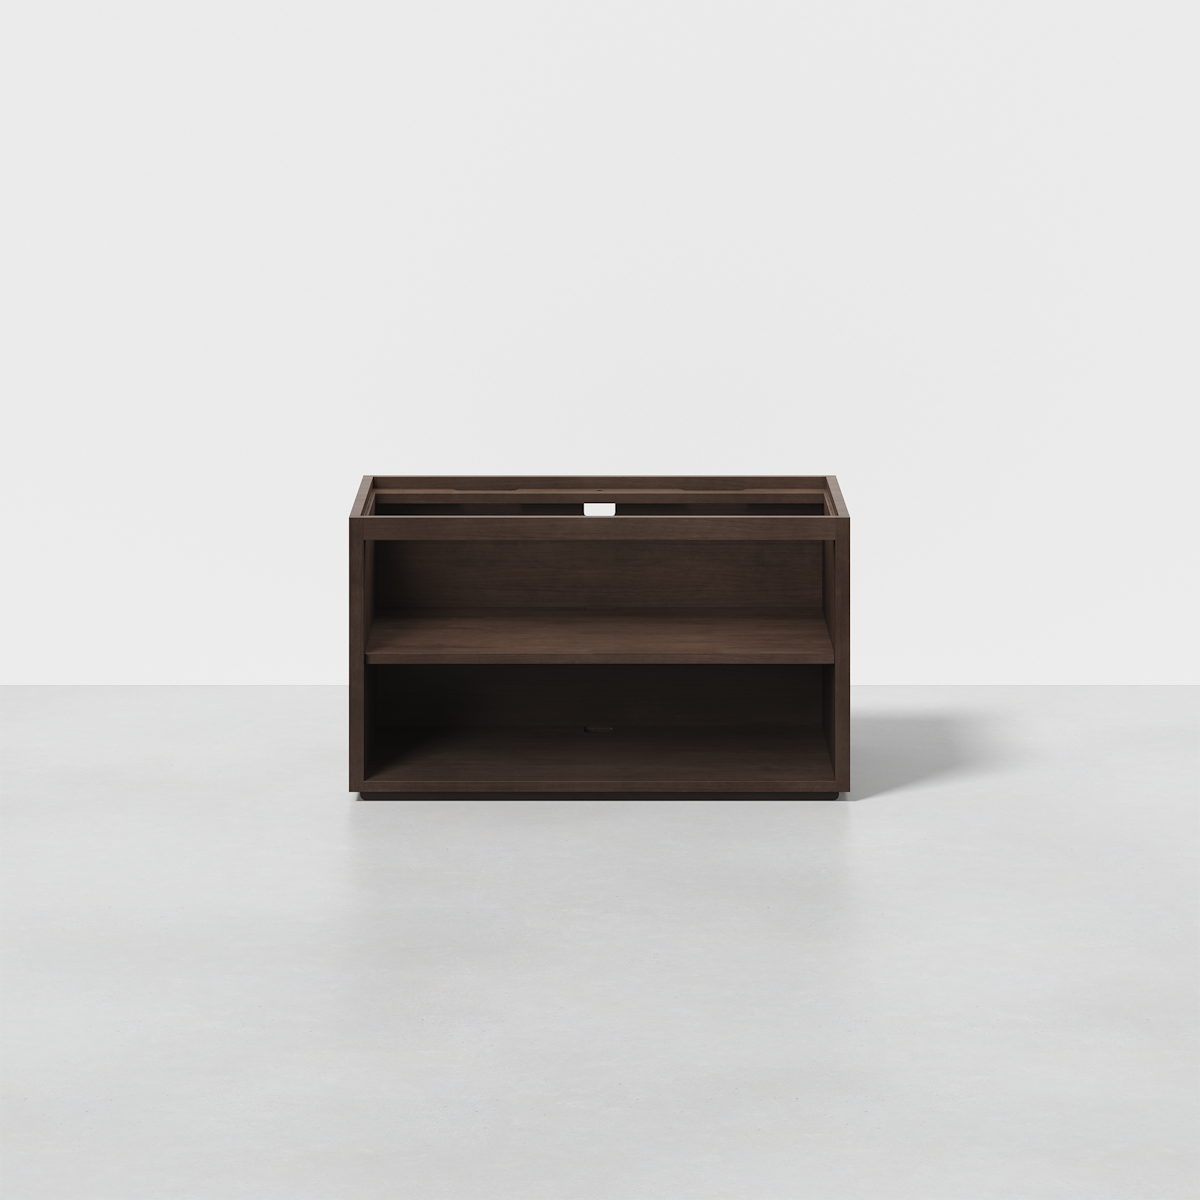 The Cubby (Espresso / Stacking Cubby) - Render - Front